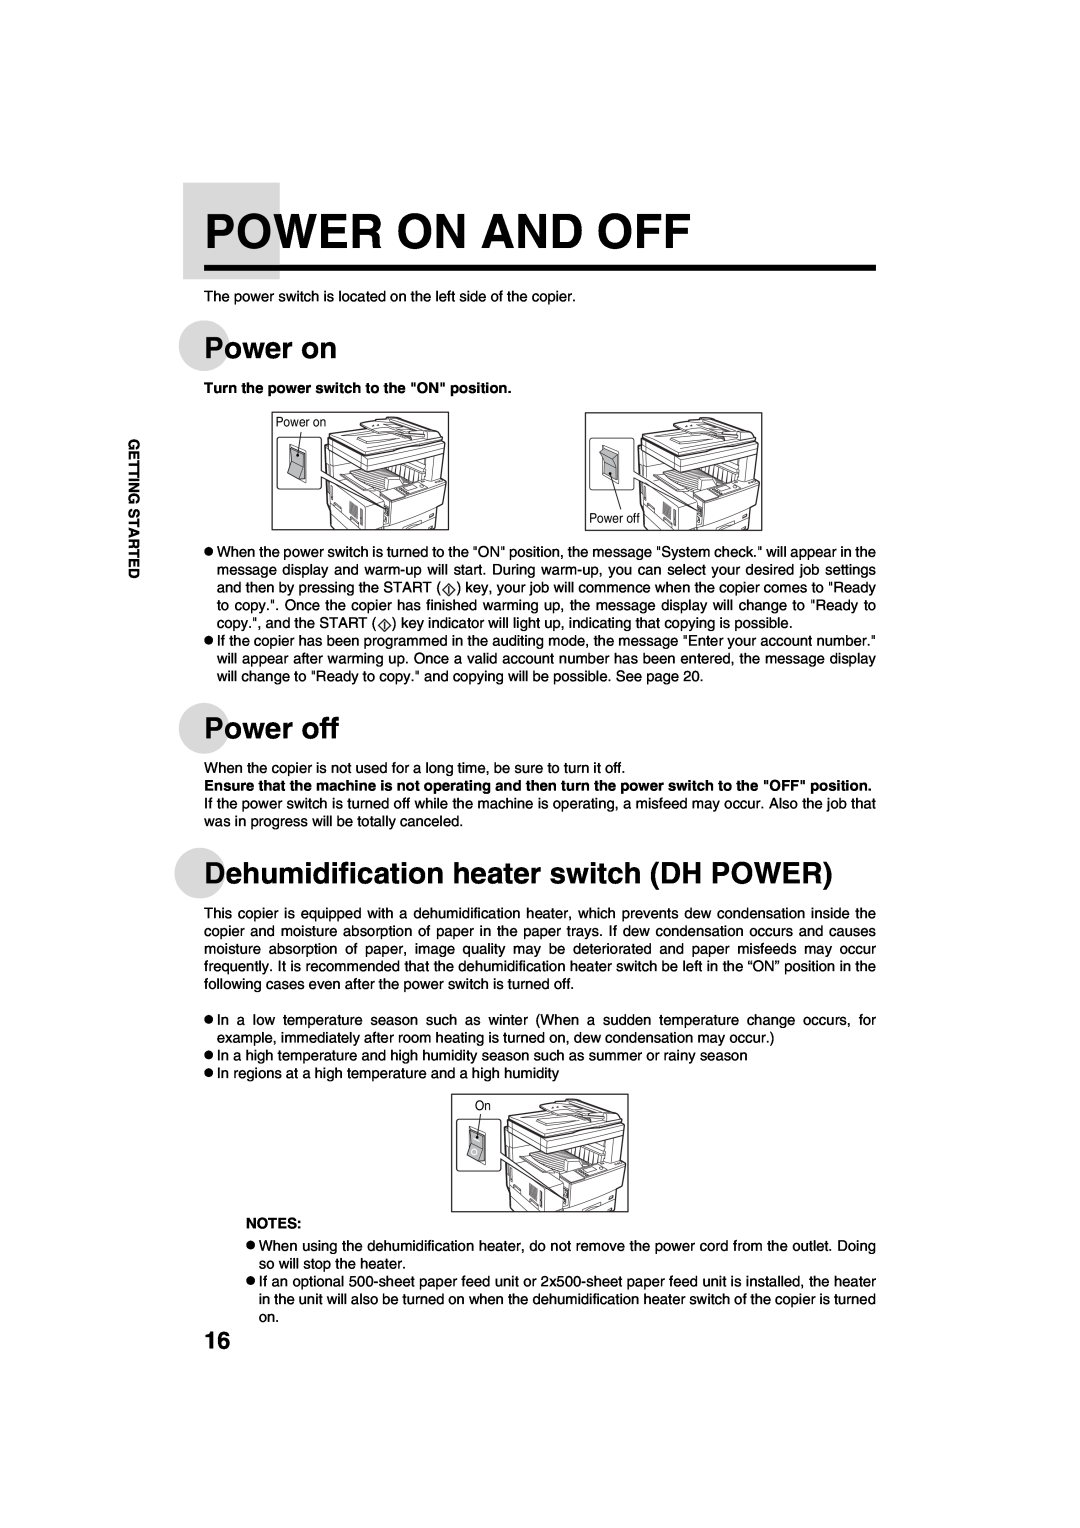 Sharp AR-M208 operation manual Power On And Off, Power on, Power off, Dehumidification heater switch DH POWER 